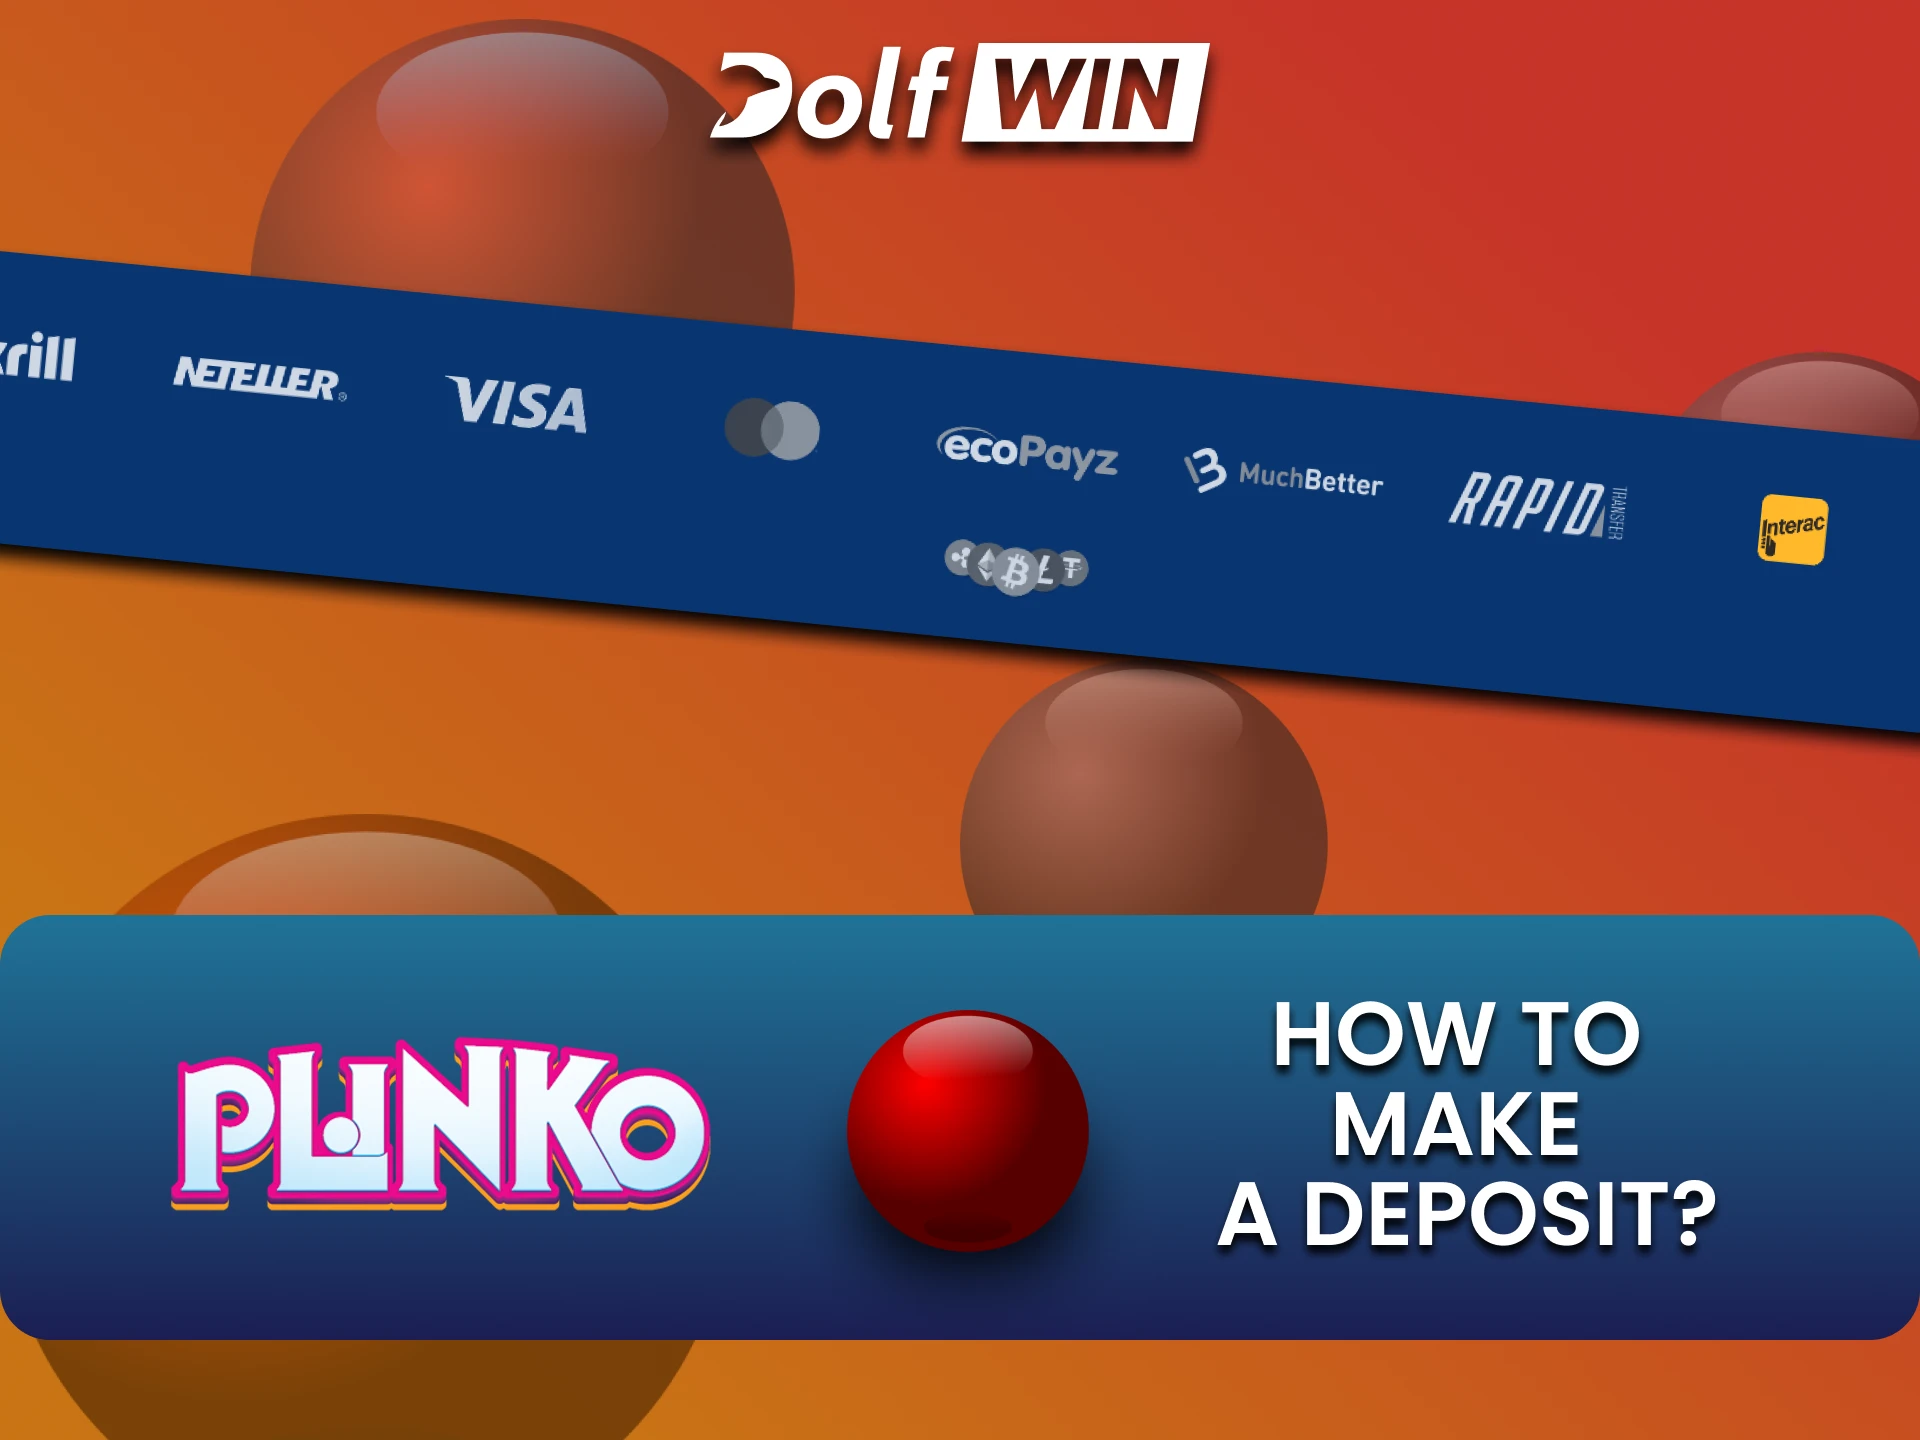 Explore ways to top up your funds on the Dolfwin website for the game Plinko.